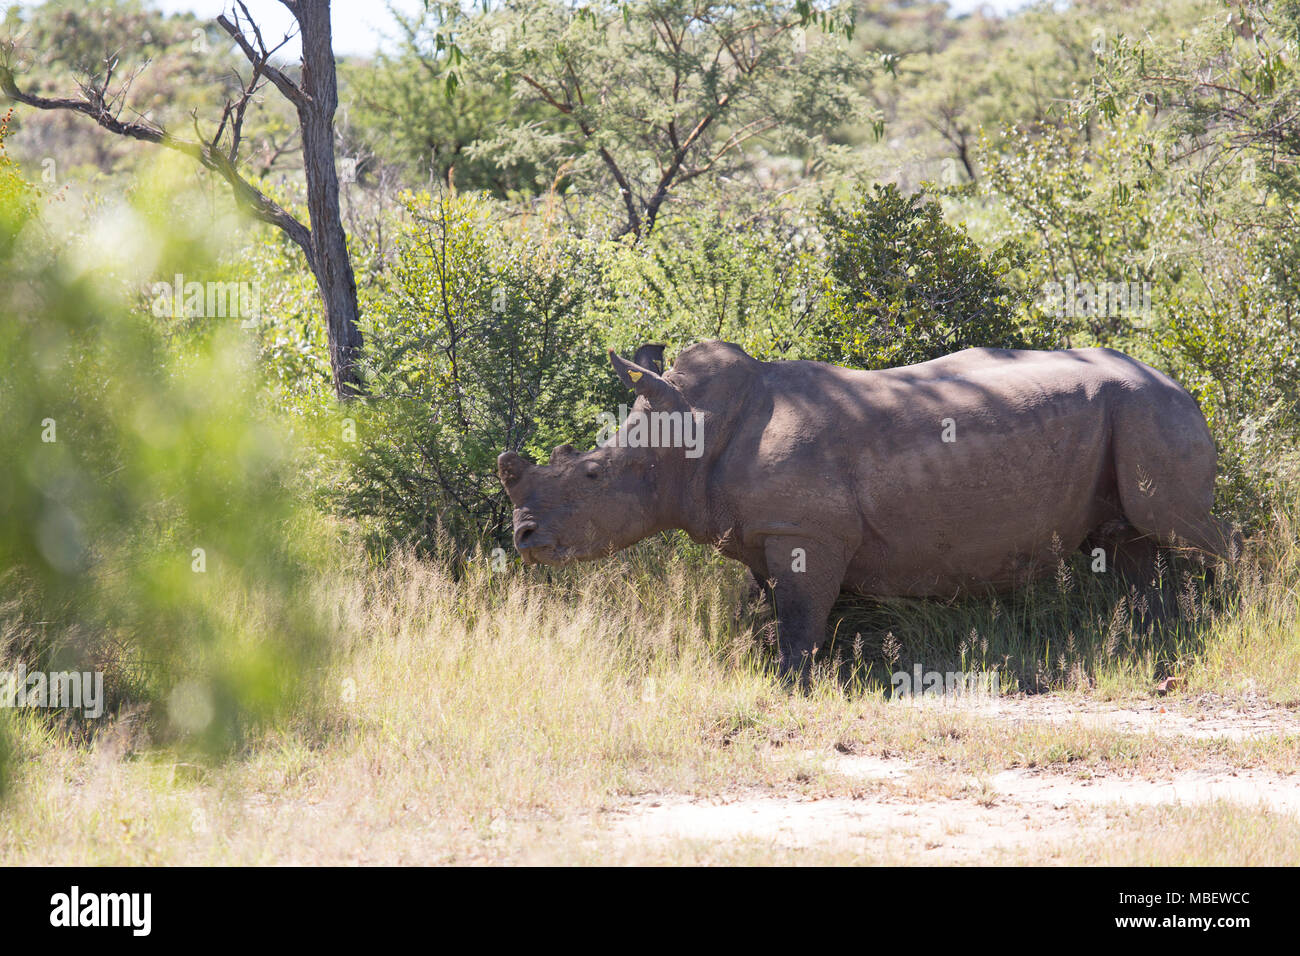 White rhino (Ceratotherium simum) in Matobo National Park, Zimbabwe. The horned creature is also known as the square-lipped rhinoceros. Stock Photo